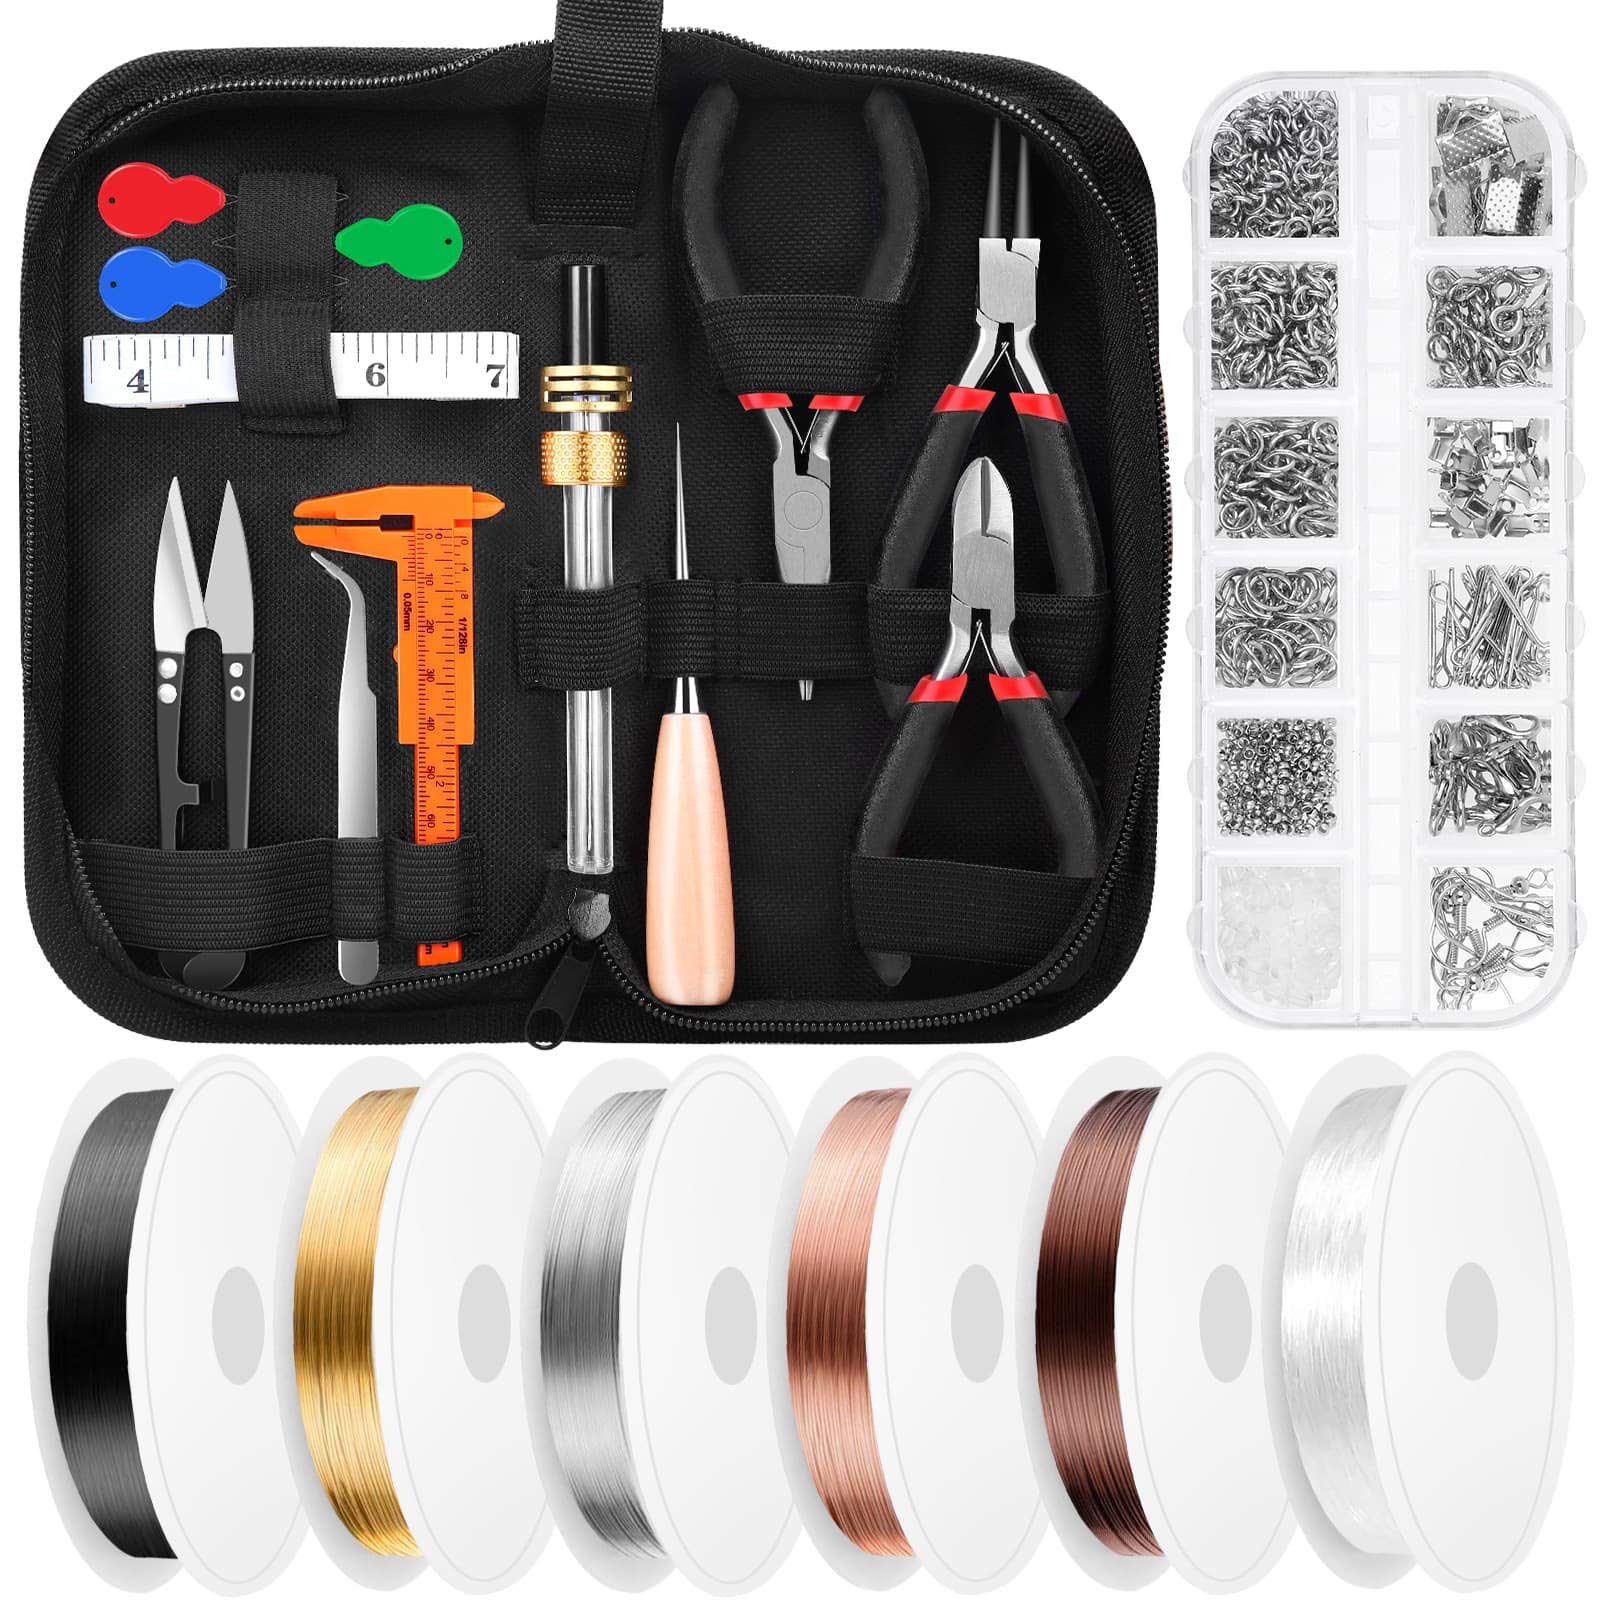 Jewelry Making Supplies Kit, Jewelry Making Kit with Jewelry Tools, Ring  Sizer Tools, Crystal Beads, Jewelry Wires and Jewelry Findings for Jewelry